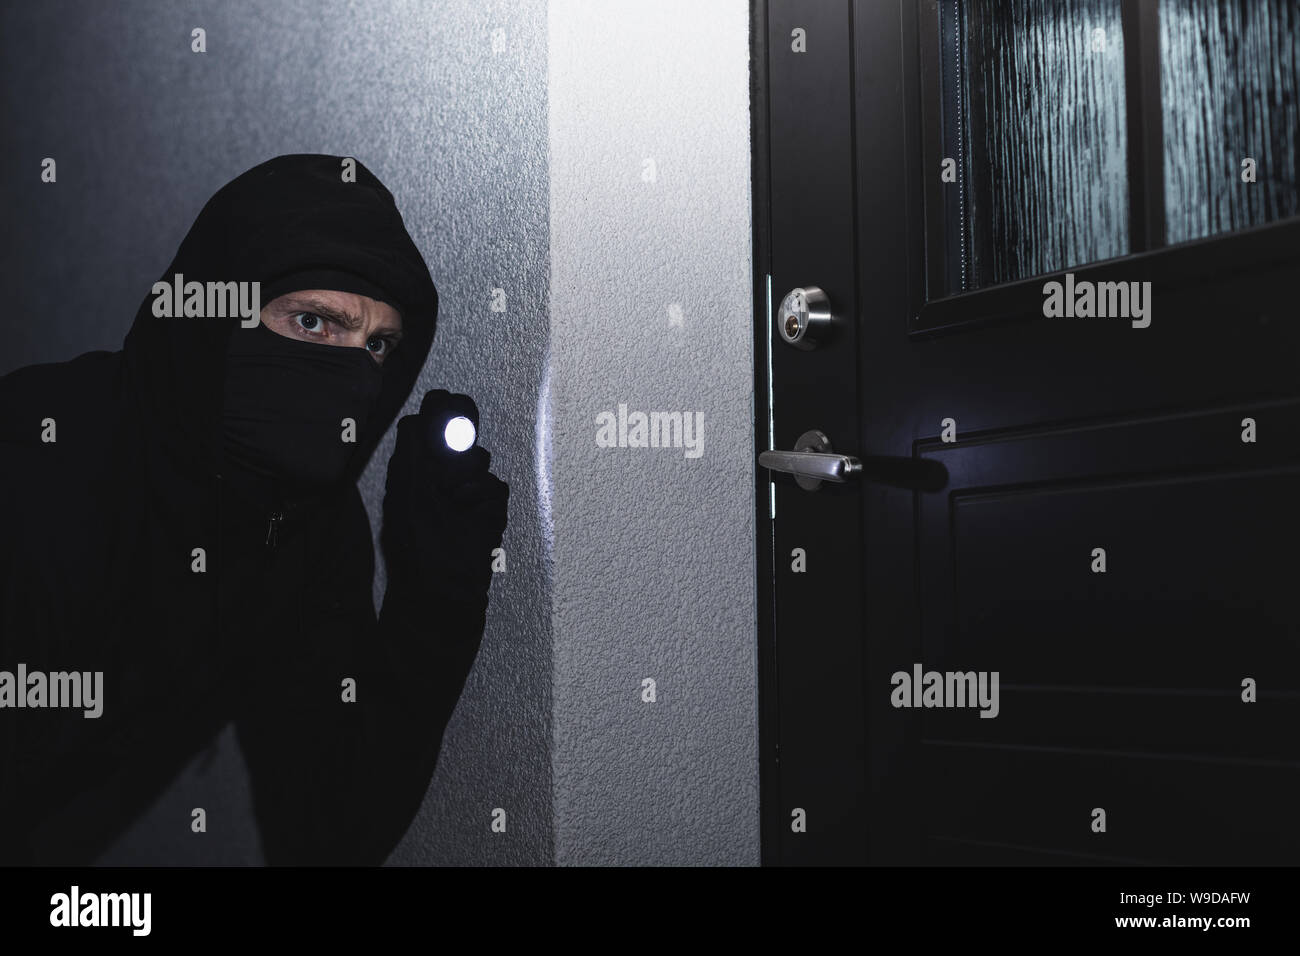 burglar in mask ready to break in the house at night Stock Photo